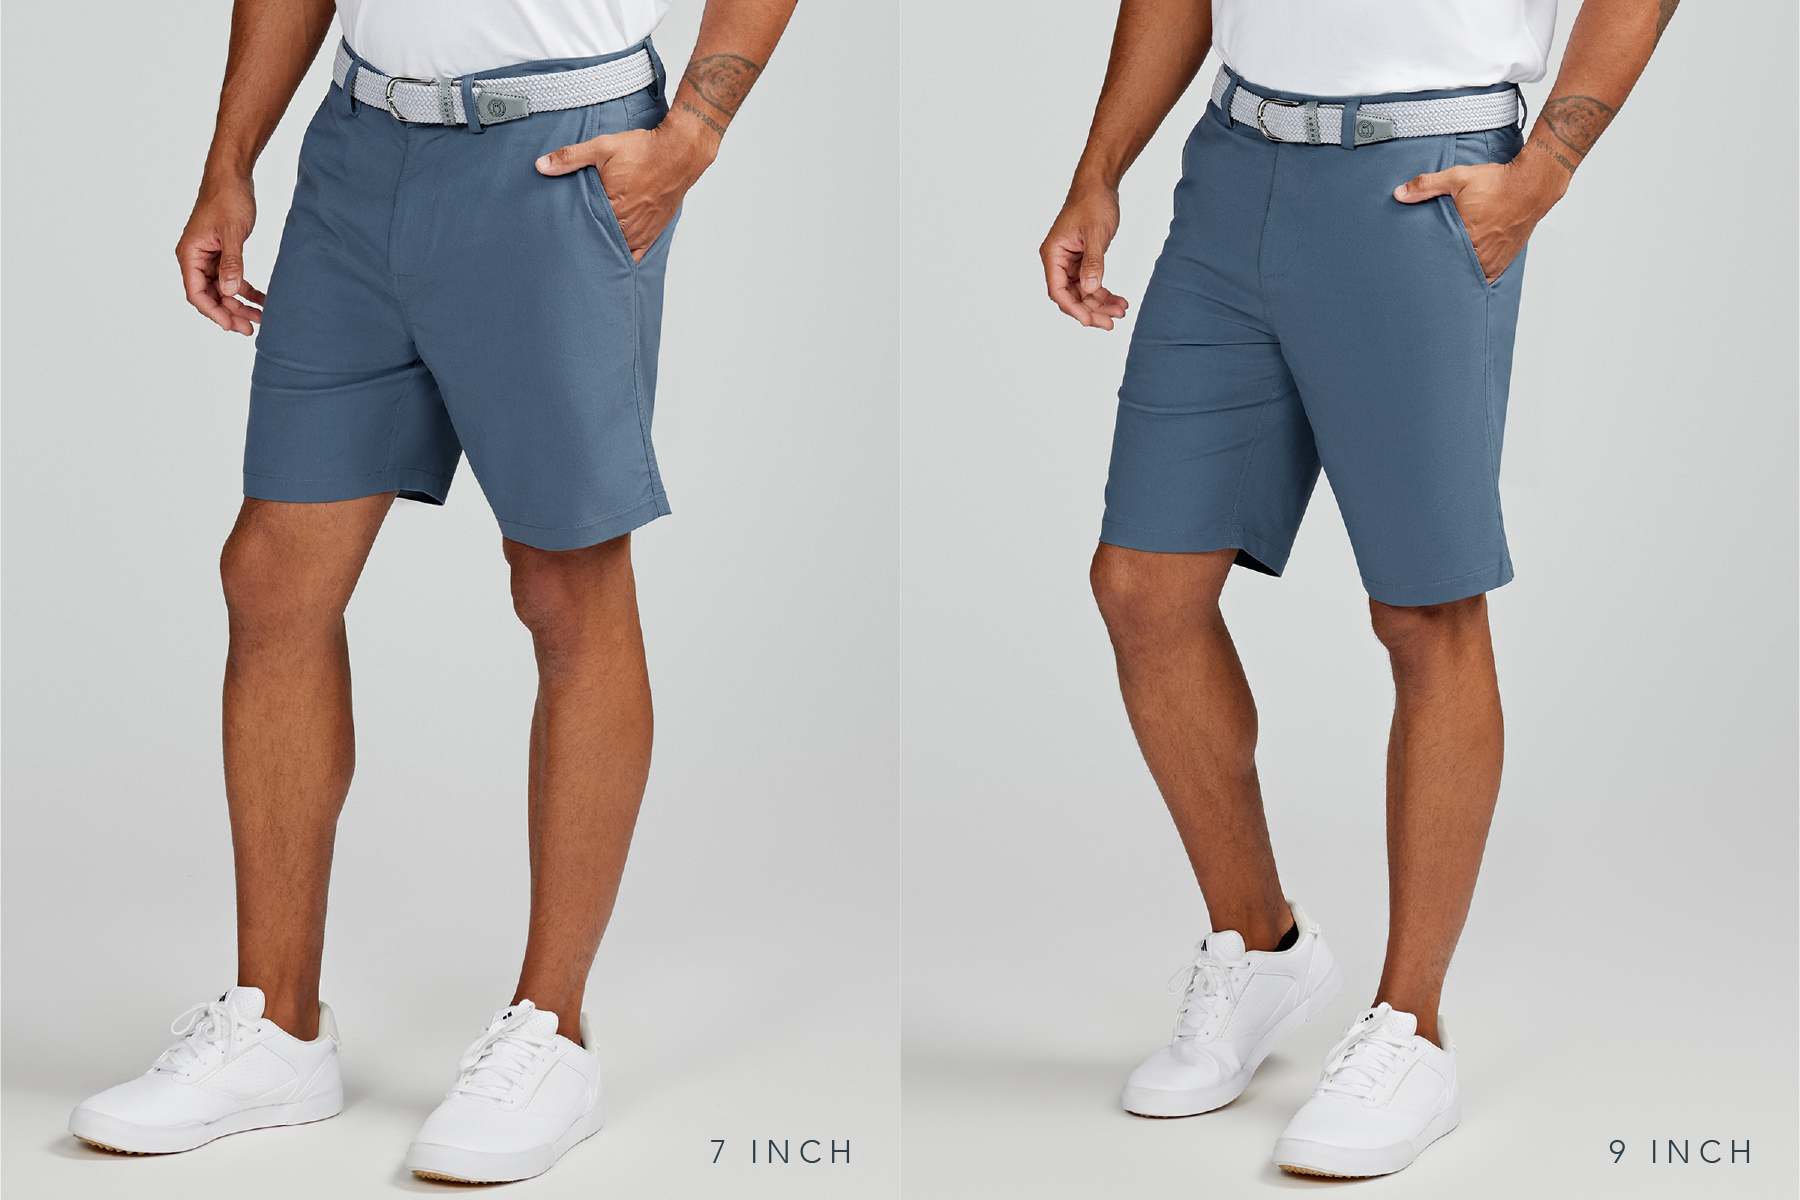 the bestselling Motion Short comes in two different lengths 7in and 9in